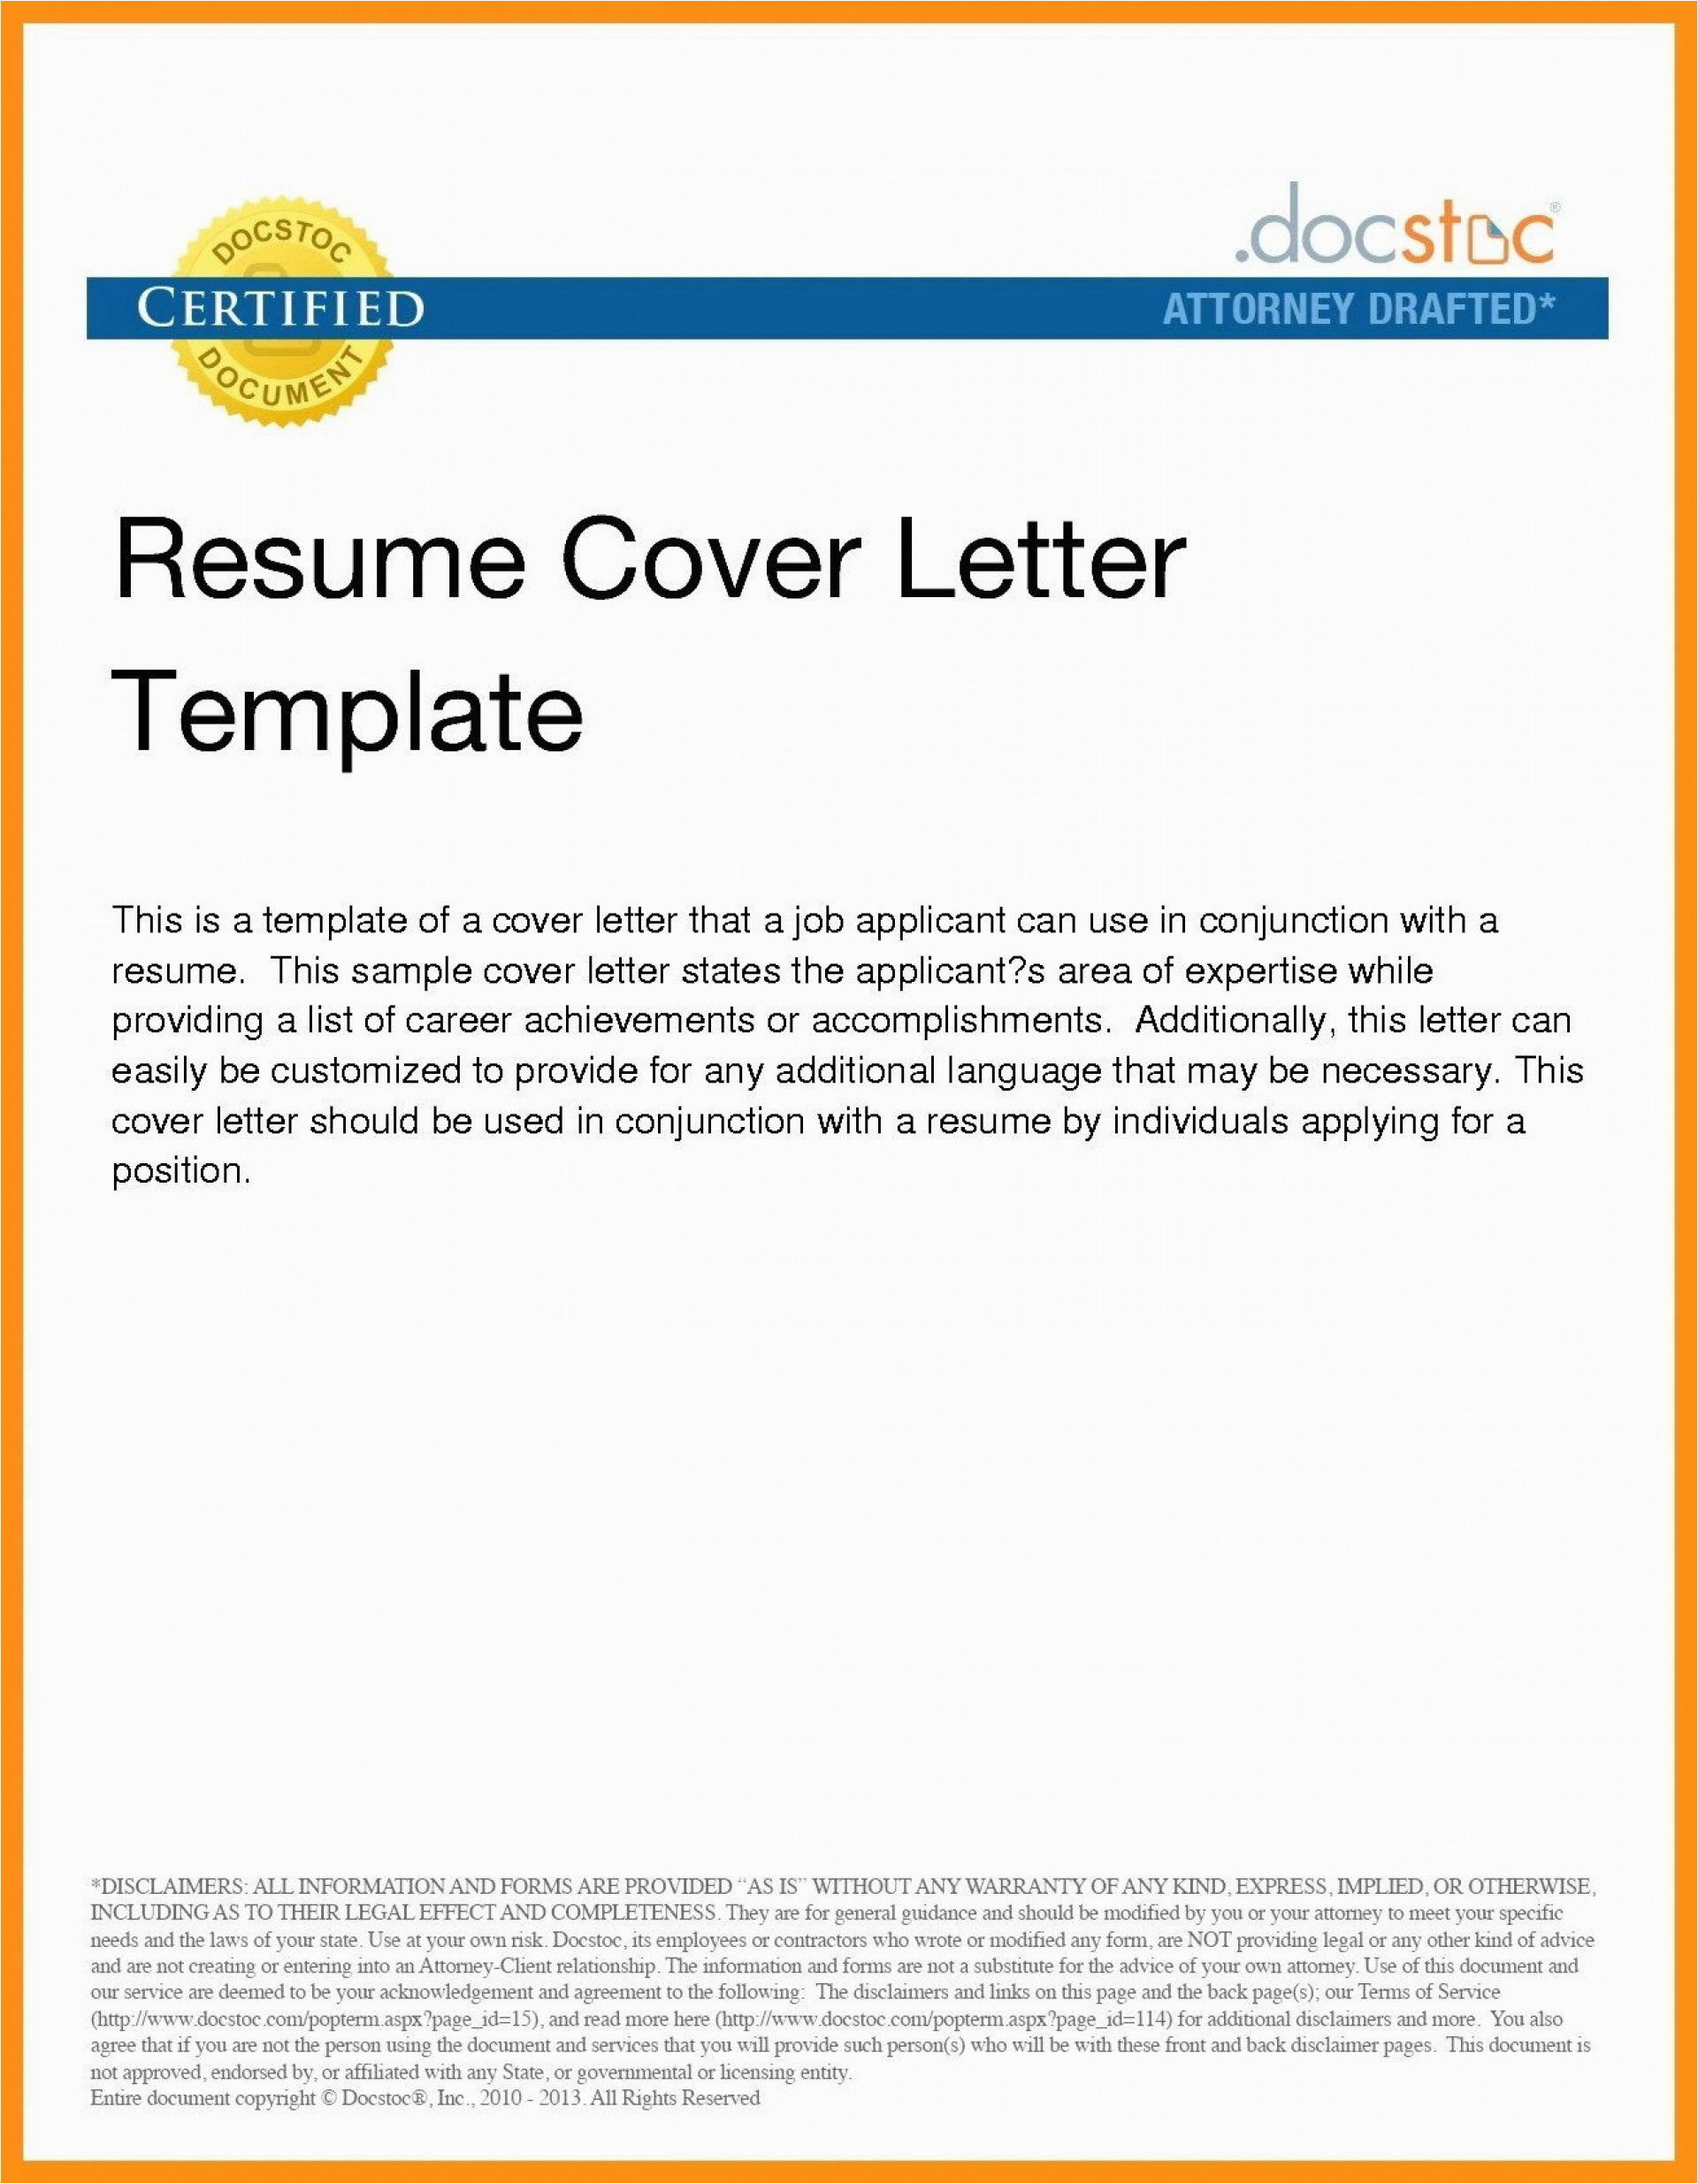 Sample Email for Resume and Cover Letter Submission Email Cover Letter Sample for A Resume Submission Addictionary